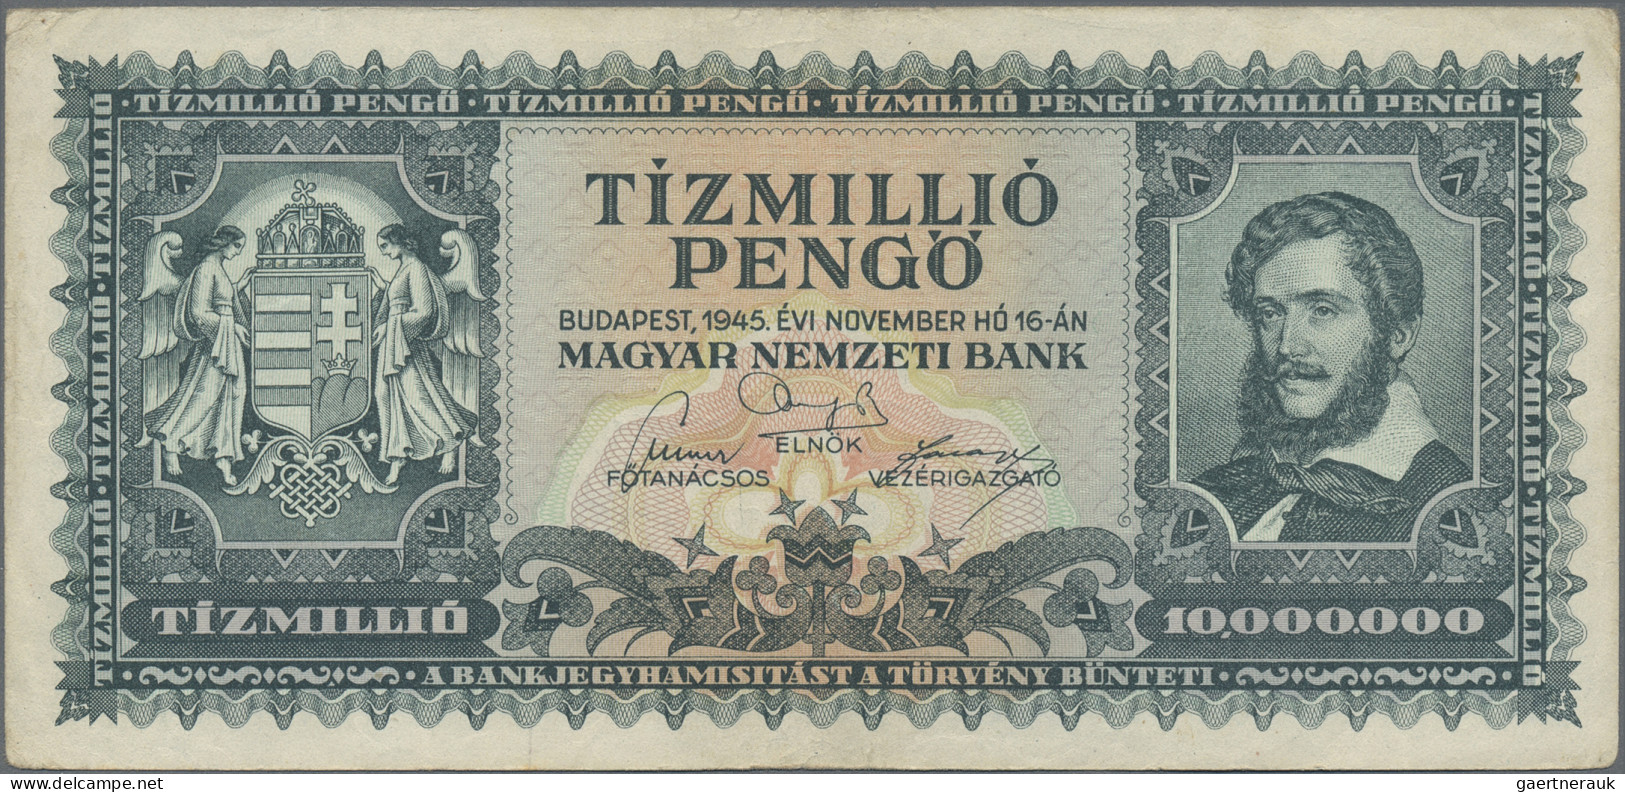 Hungary: Hungary, Inflation Lot With 13 Banknotes 1945-1946 Series, 500 Pengö – - Hungría